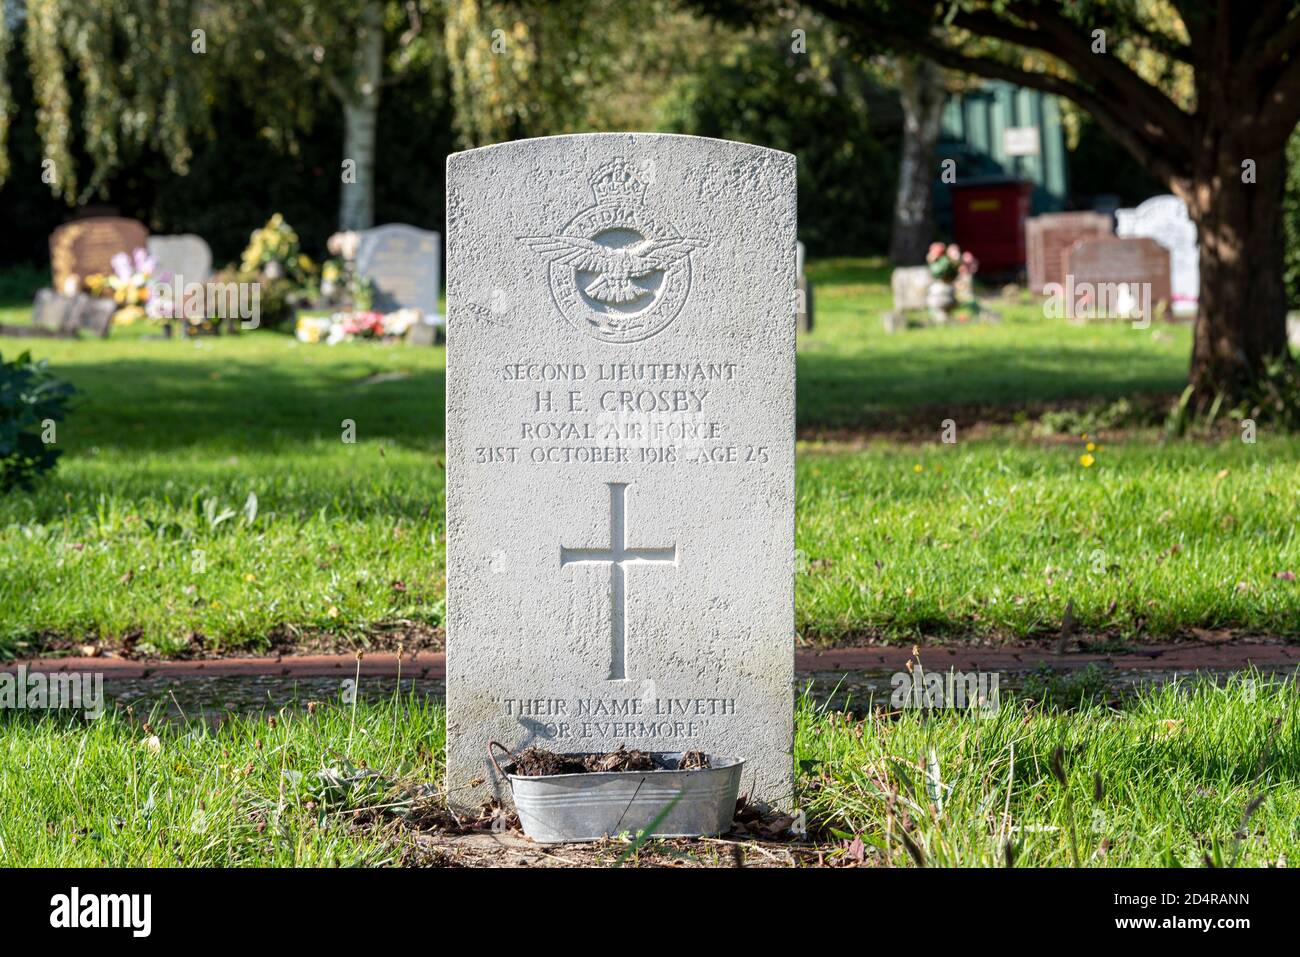 Headstone, gravestone on grave of HE Crosby, Royal Air Force Second Lieutenant, died 31 October 1918, age 25, with 61 Squadron RAF Rochford, Southend Stock Photo